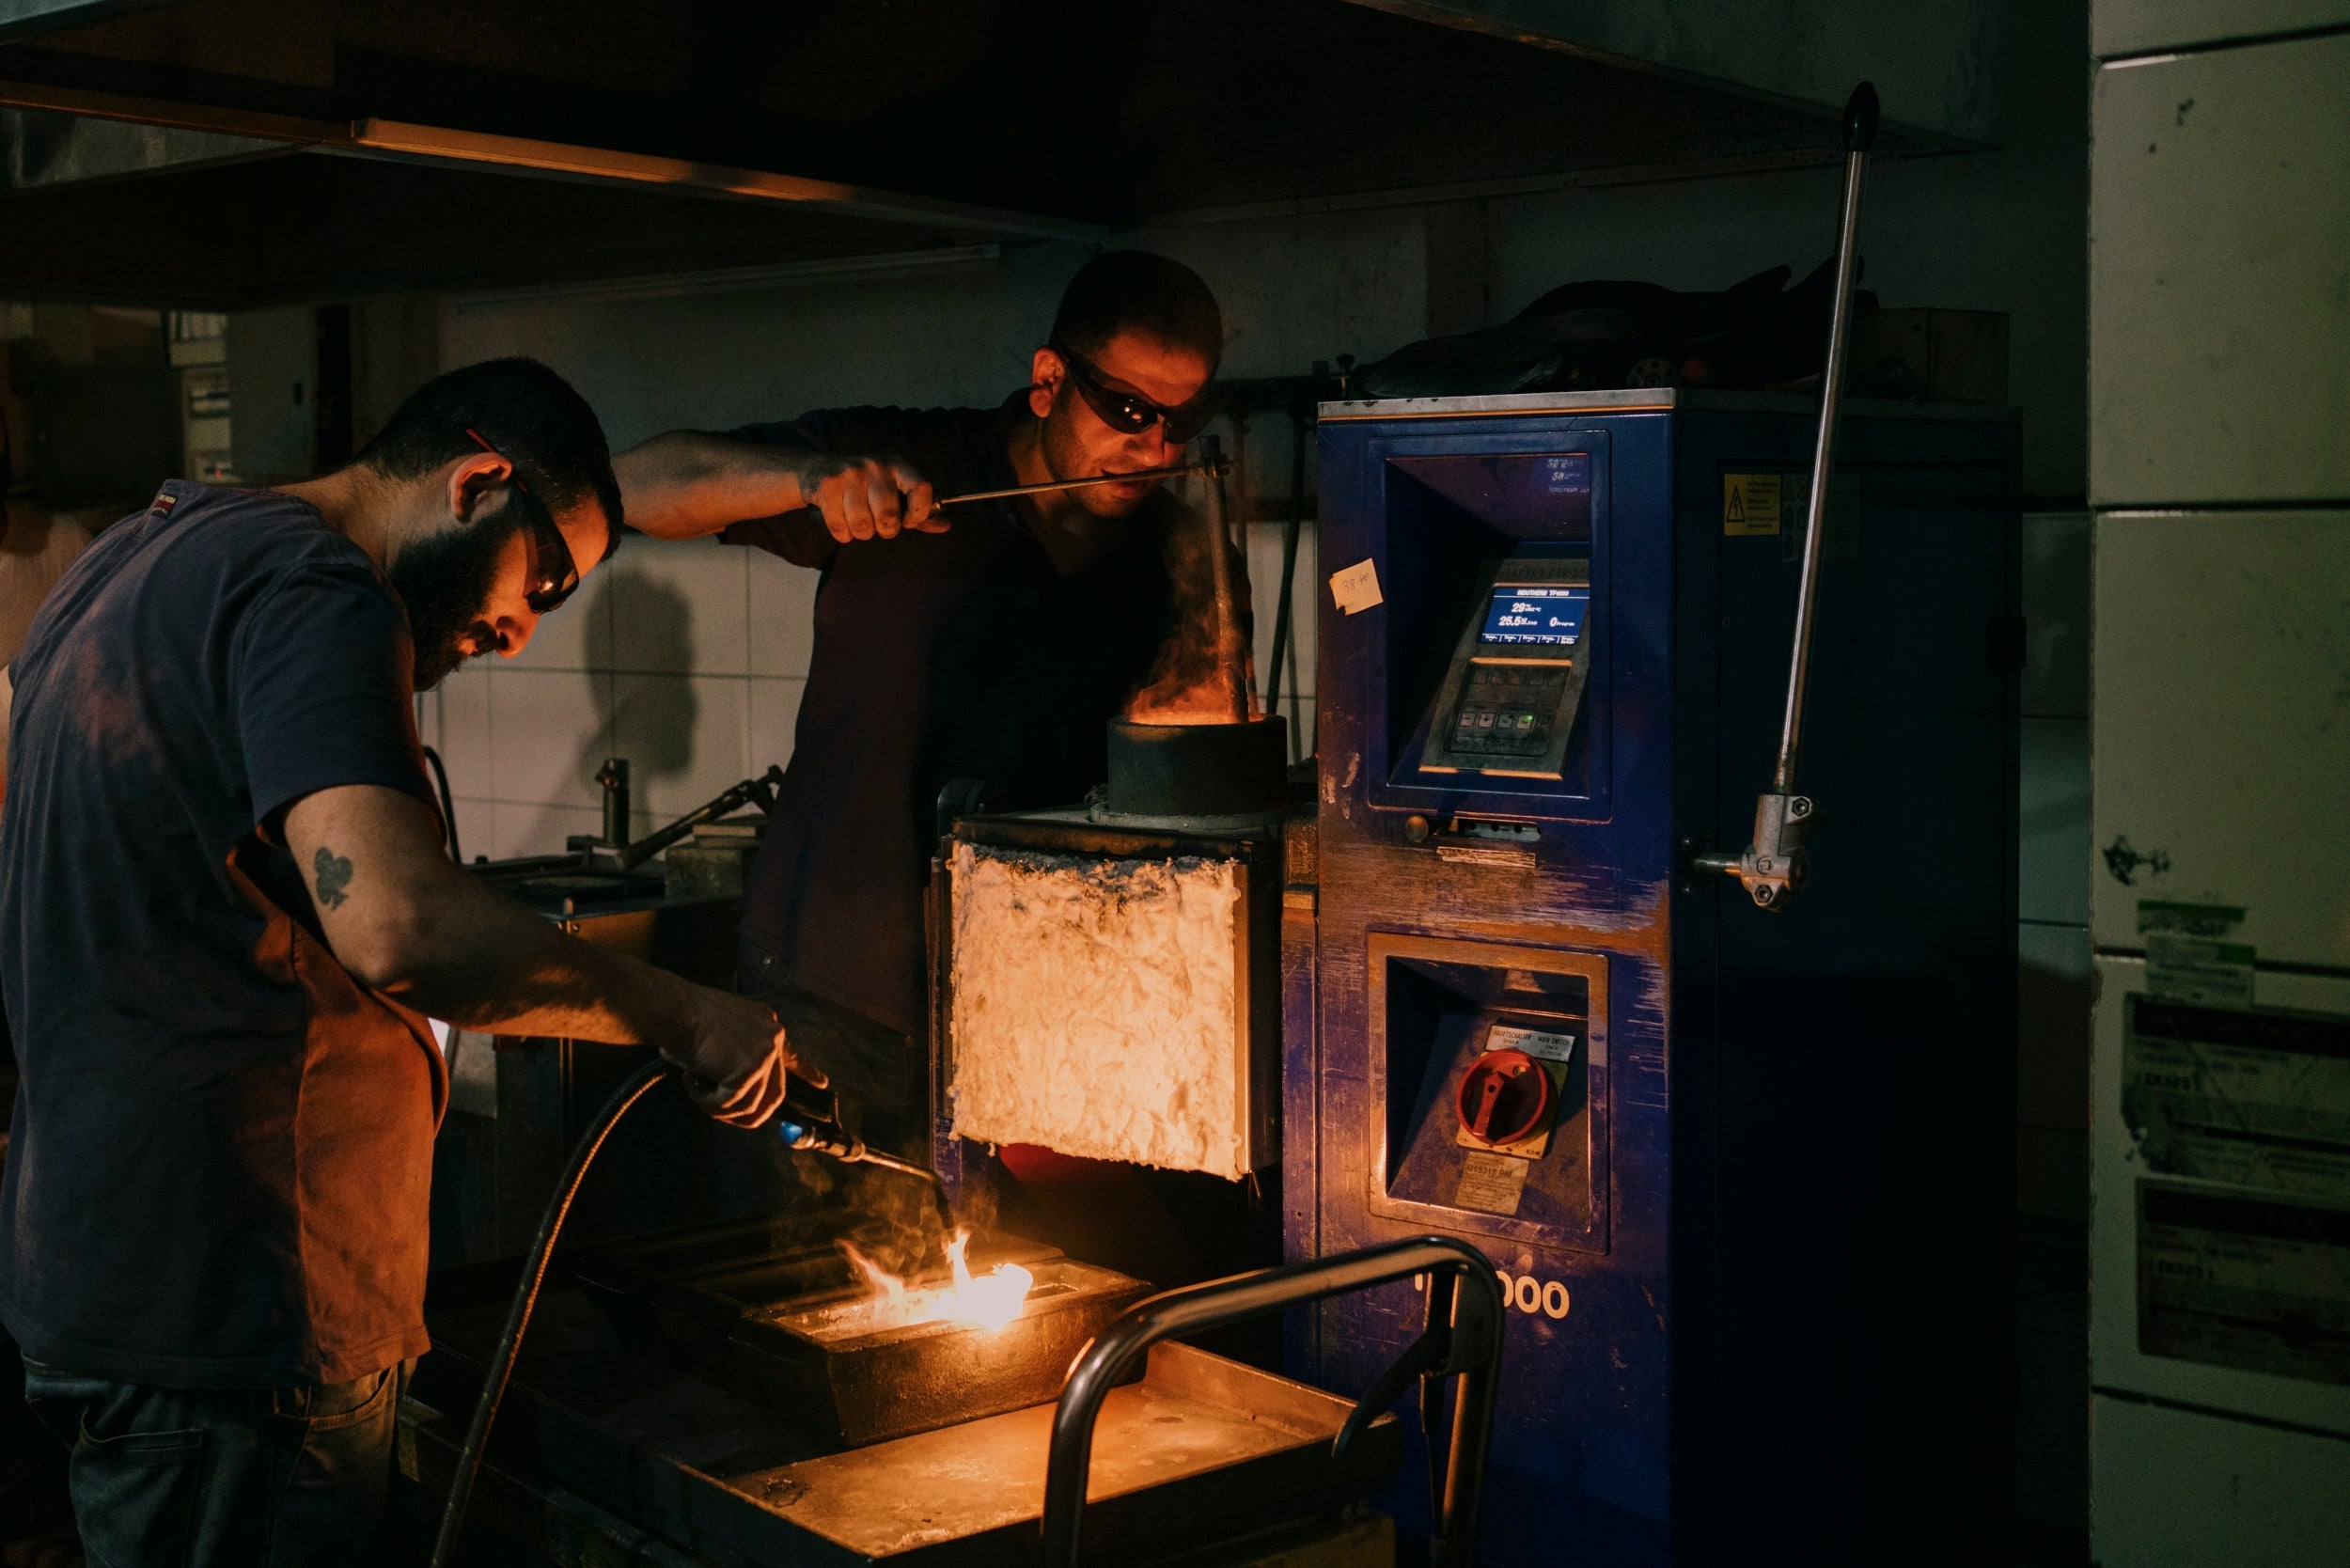 Gold is melted, then poured into moulds to make bars (Washington Post/Lorenzo Tugnoli)